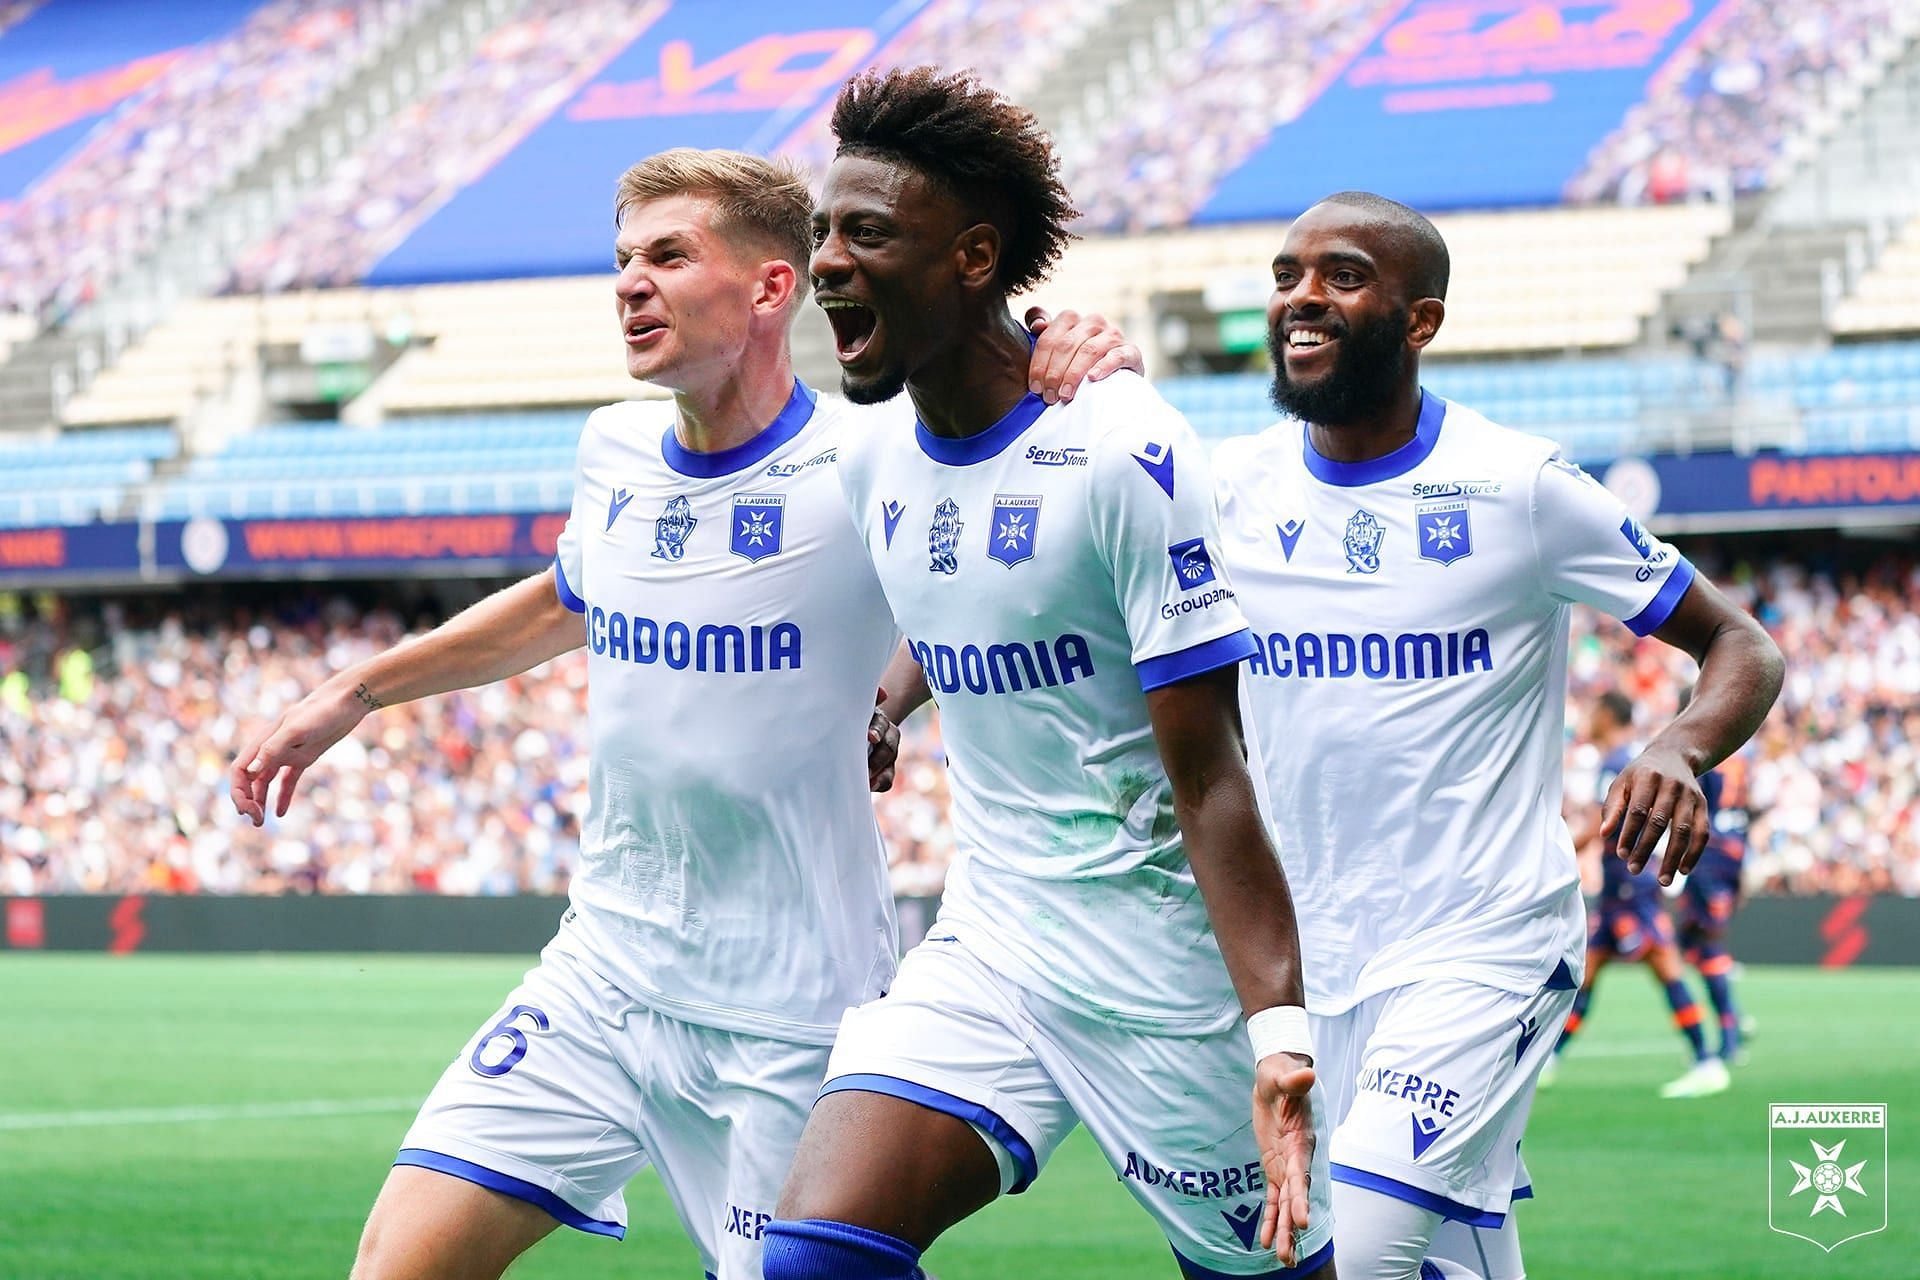 Can Auxerre beat fellow strugglers Brest in a Ligue 1 game this weekend?